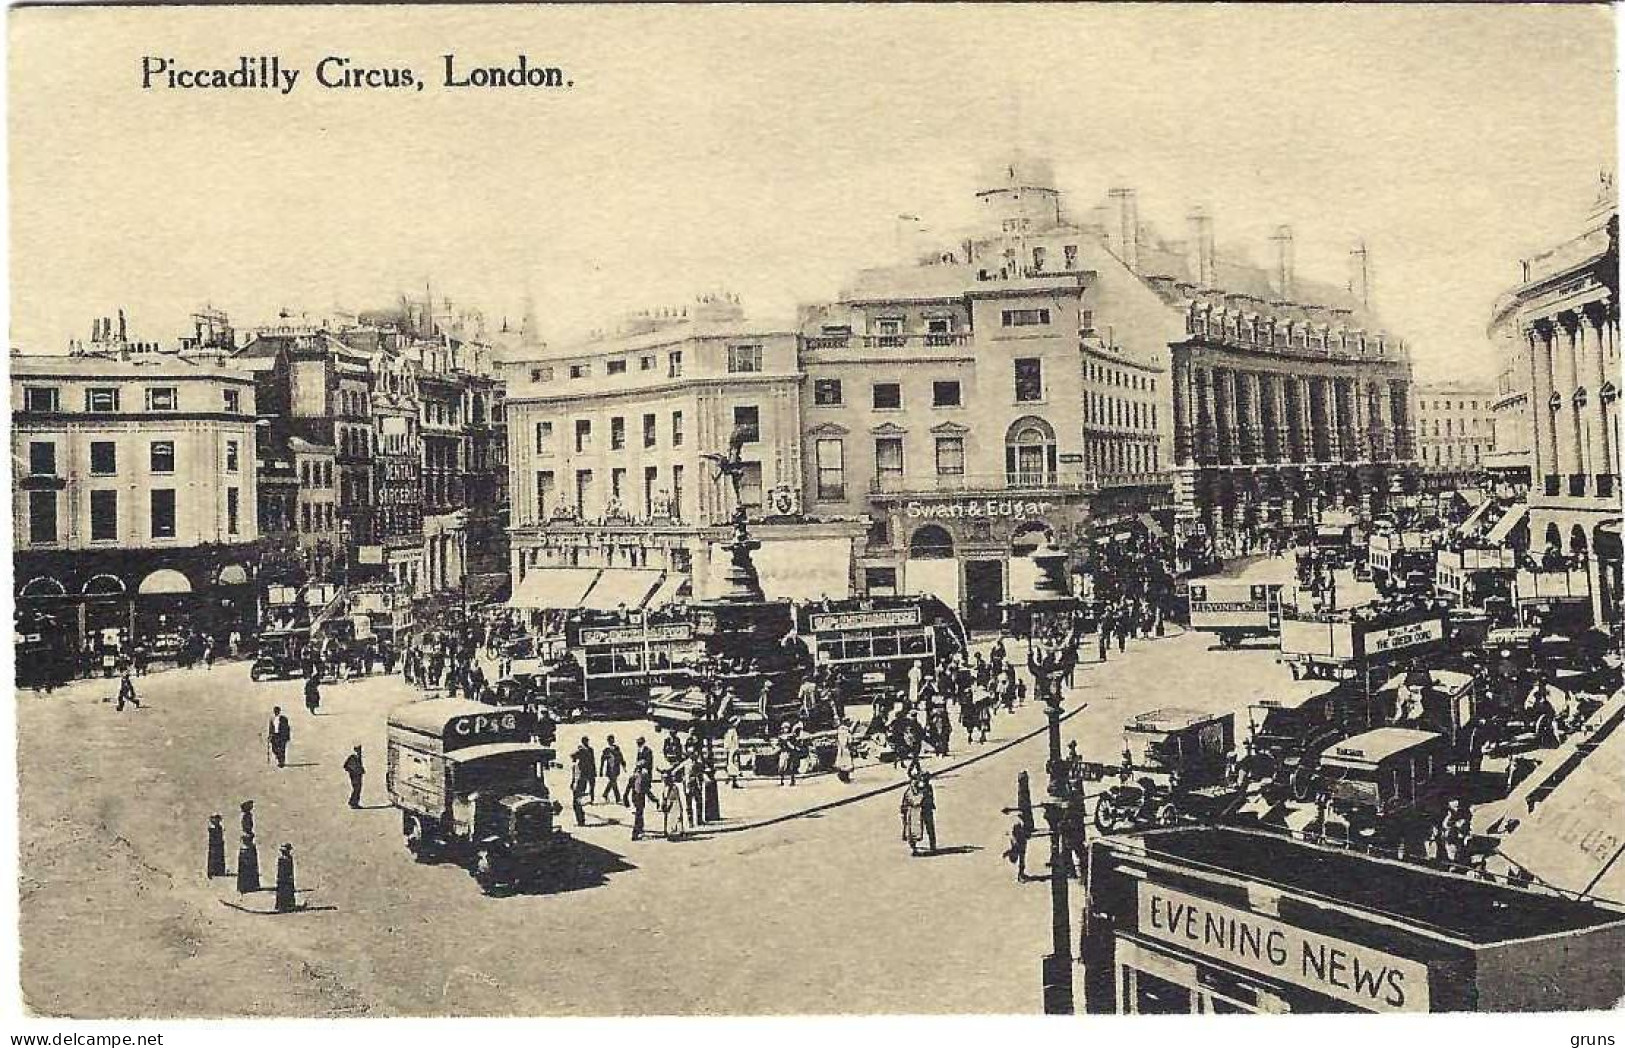 London Piccadilly Circus - Piccadilly Circus